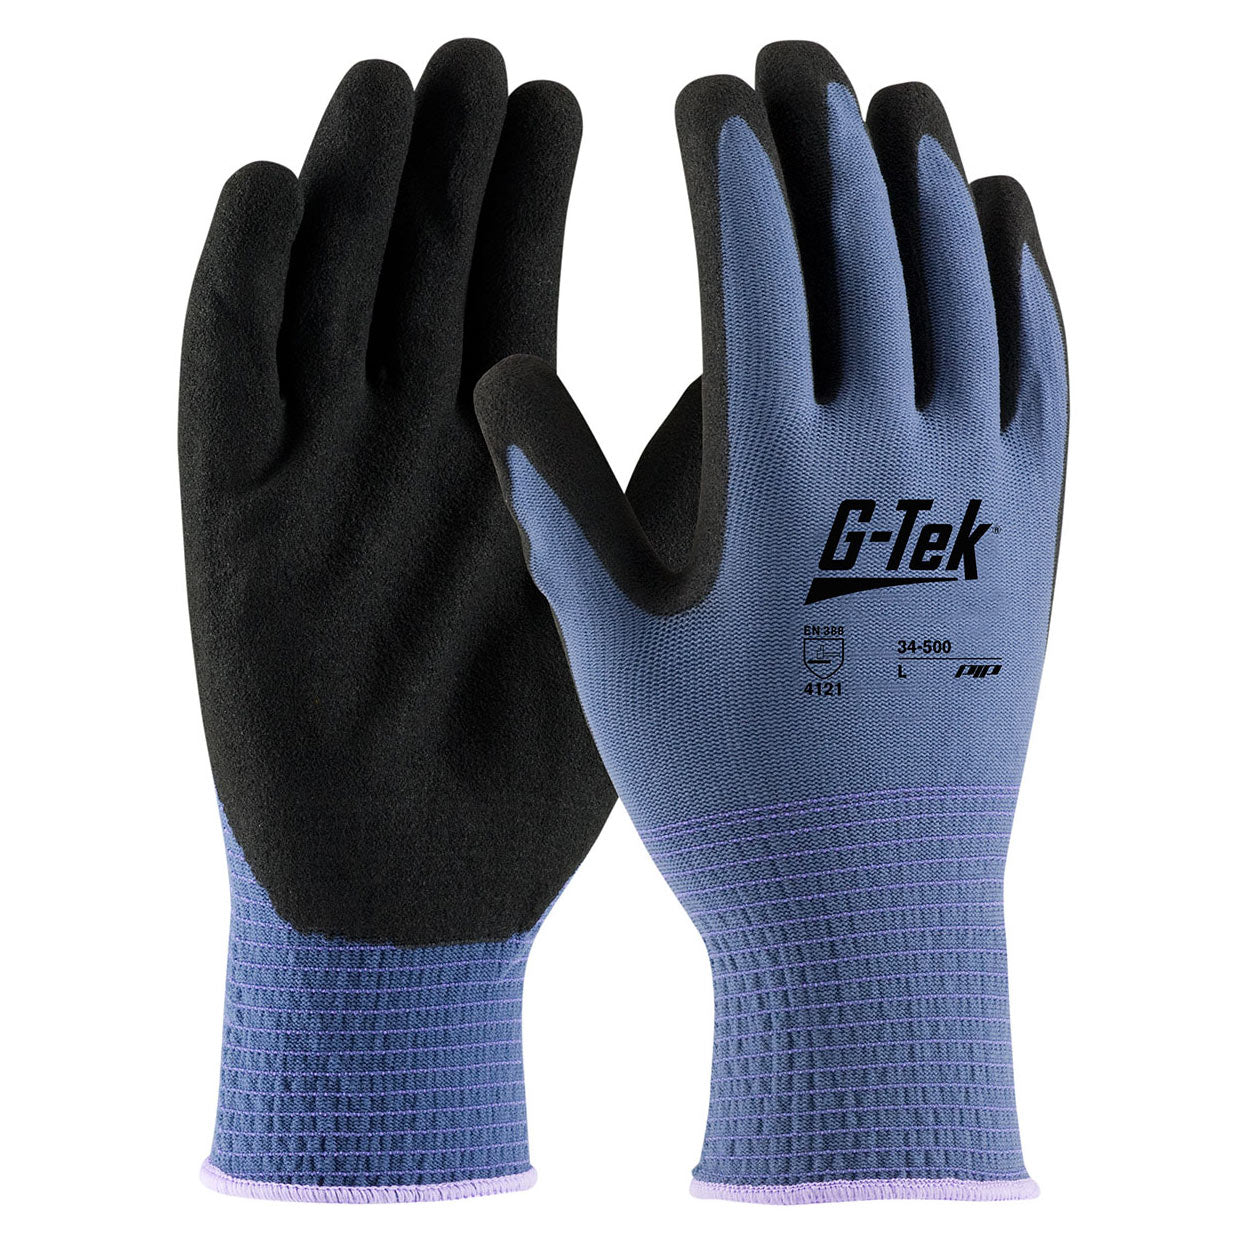 PIP 34-500 G-Tek GP Seamless Knit Nylon Gloves - Nitrile Coated MicroSurface Grip on Palm & Fingers (12 Pairs)-eSafety Supplies, Inc